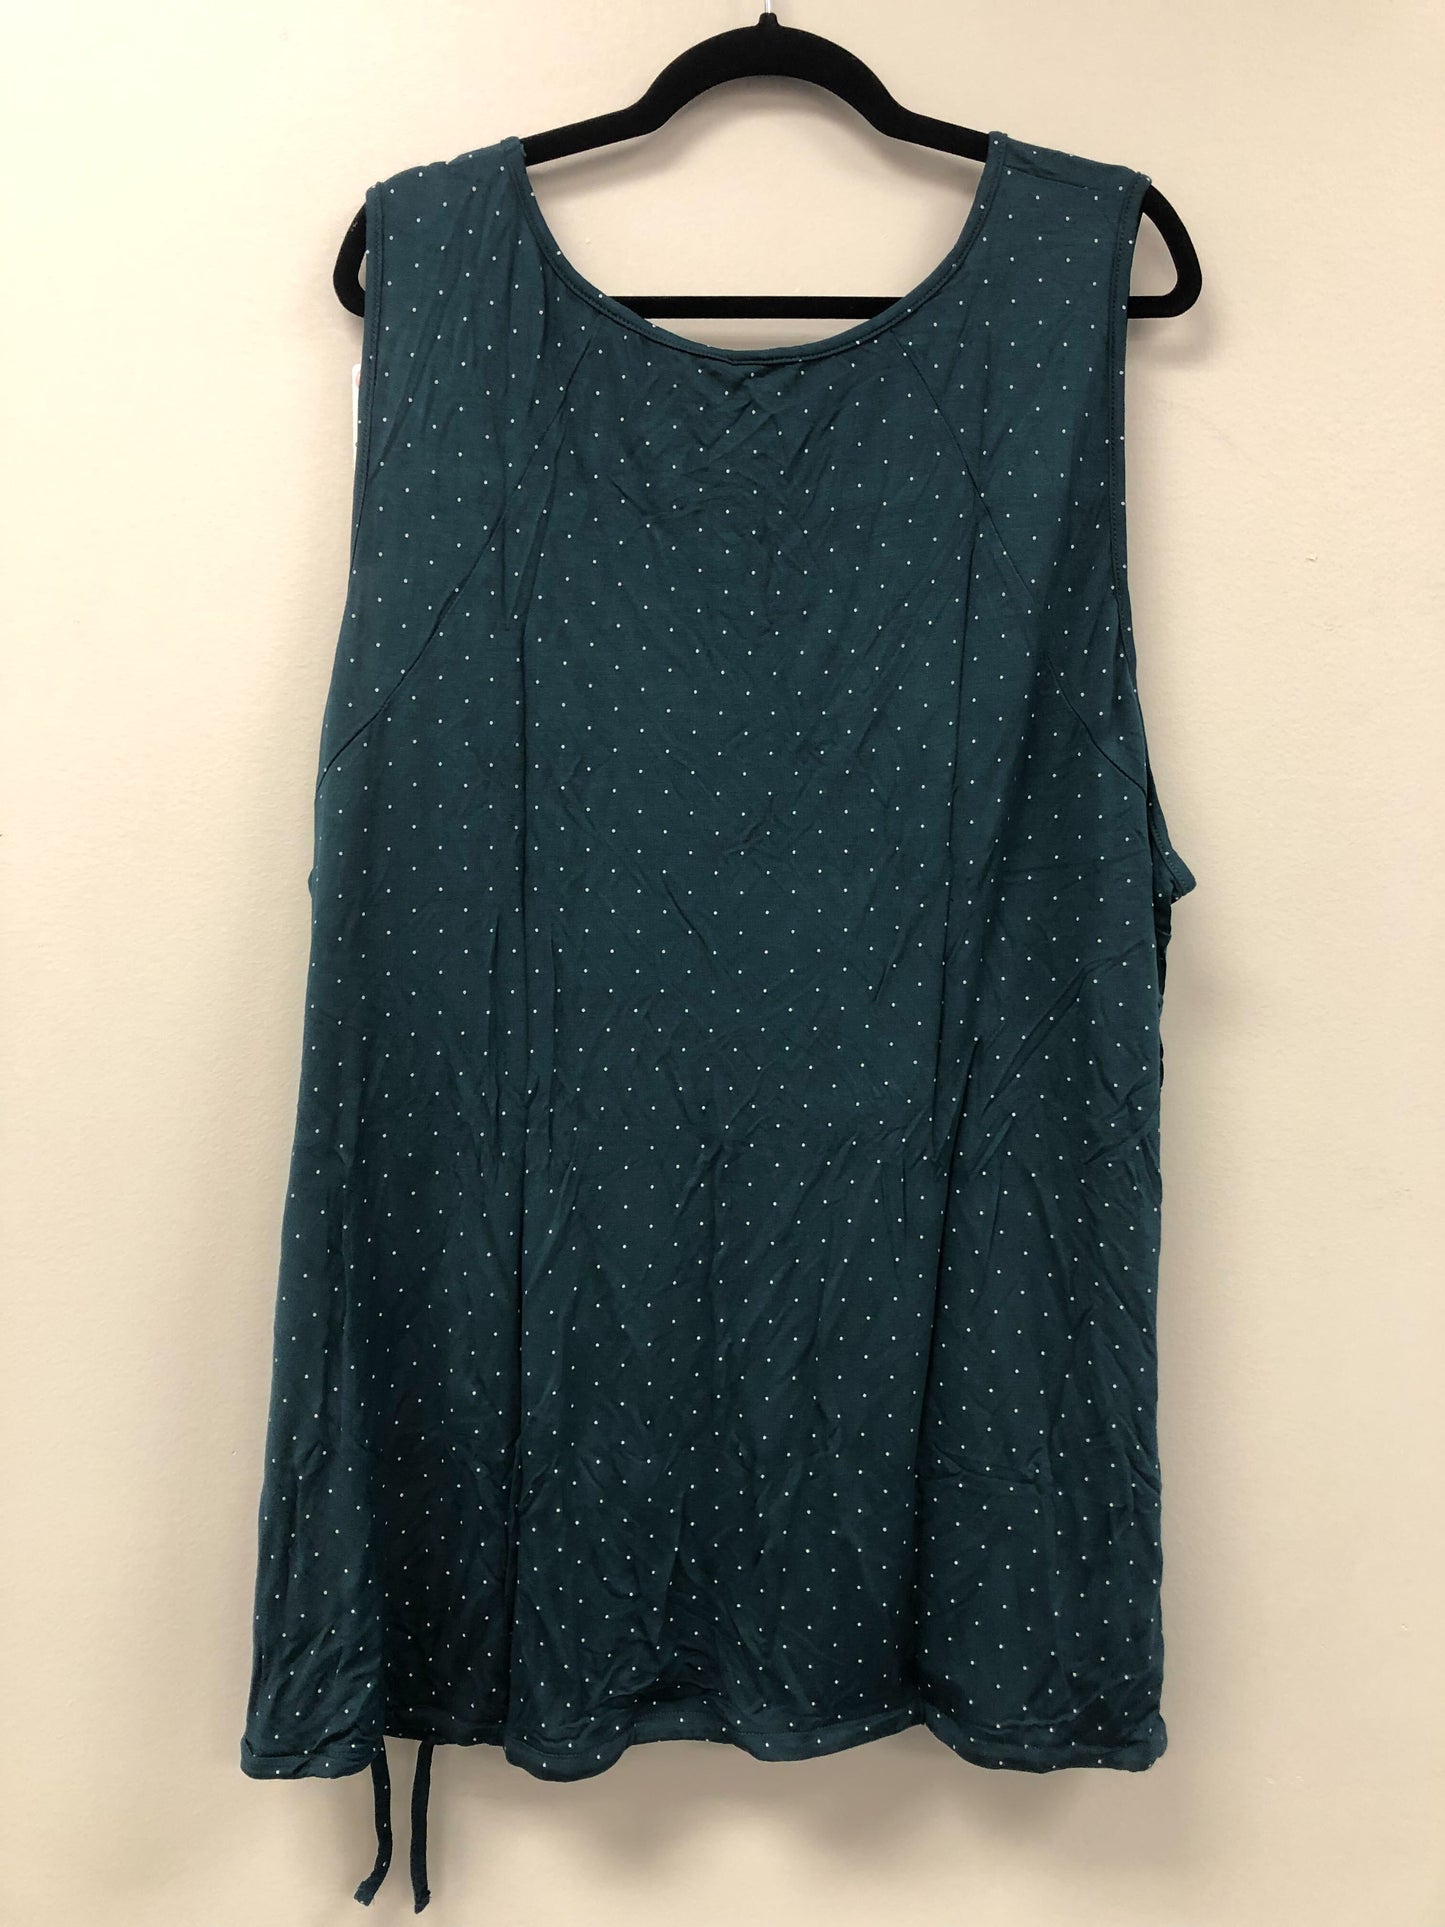 Outlet 5931 - Latched Mama Active Nursing Tank - Teal Dots - 4X